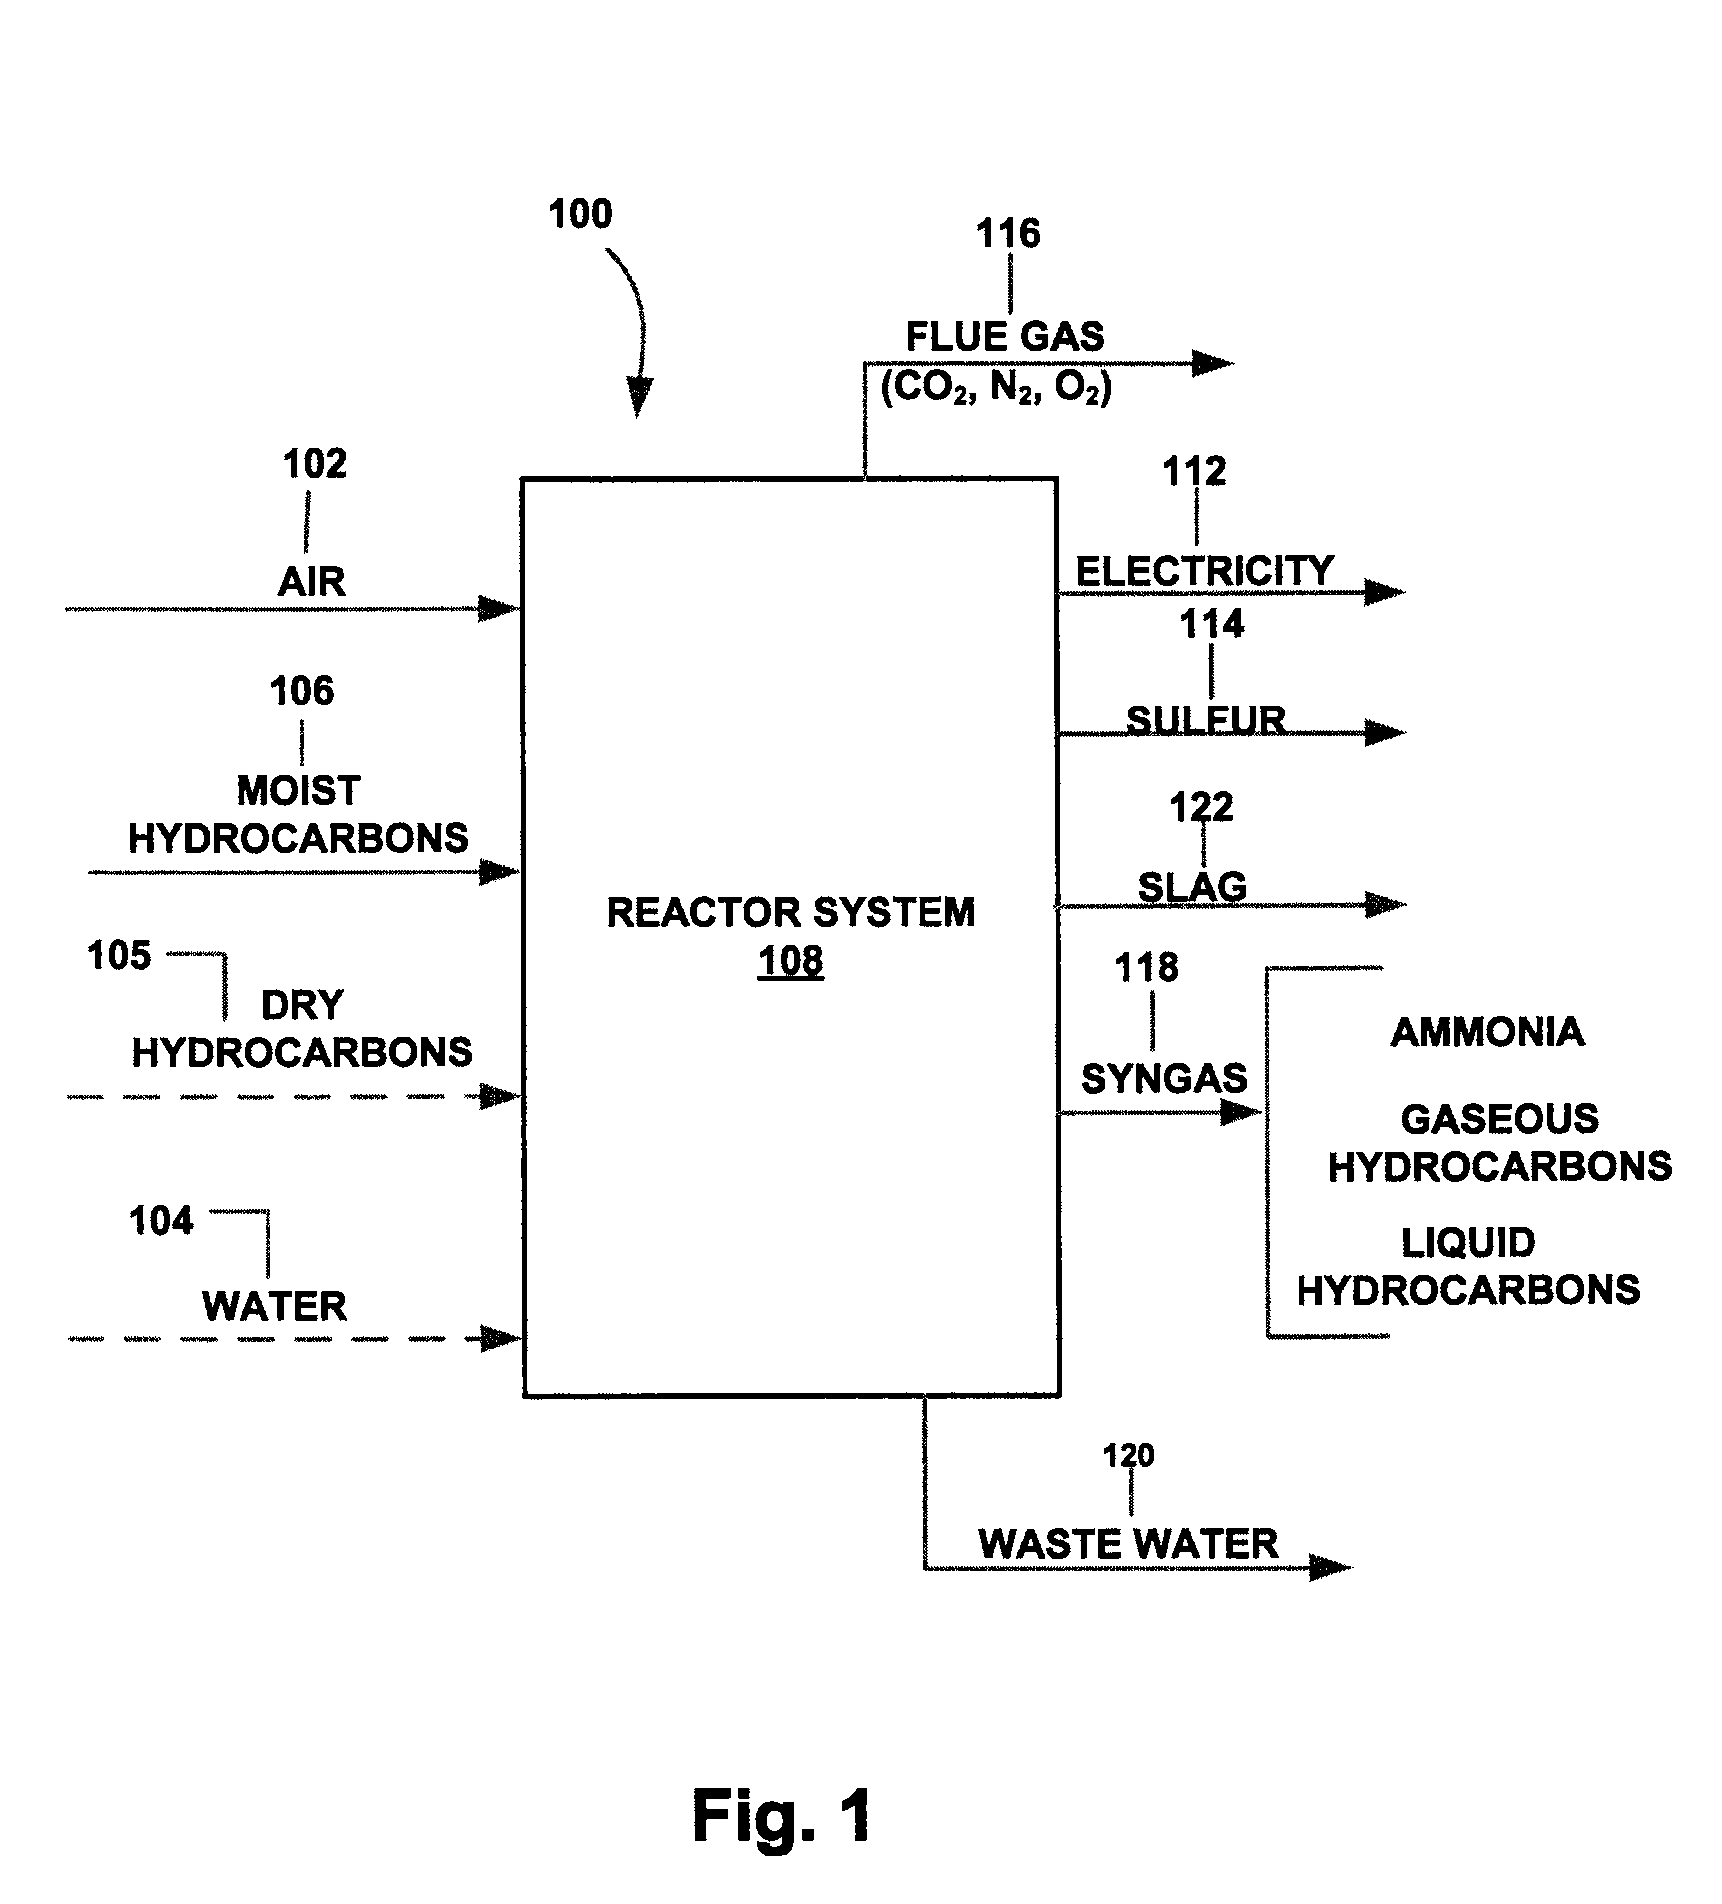 Method for the gasification of moisture-containing hydrocarbon feedstocks